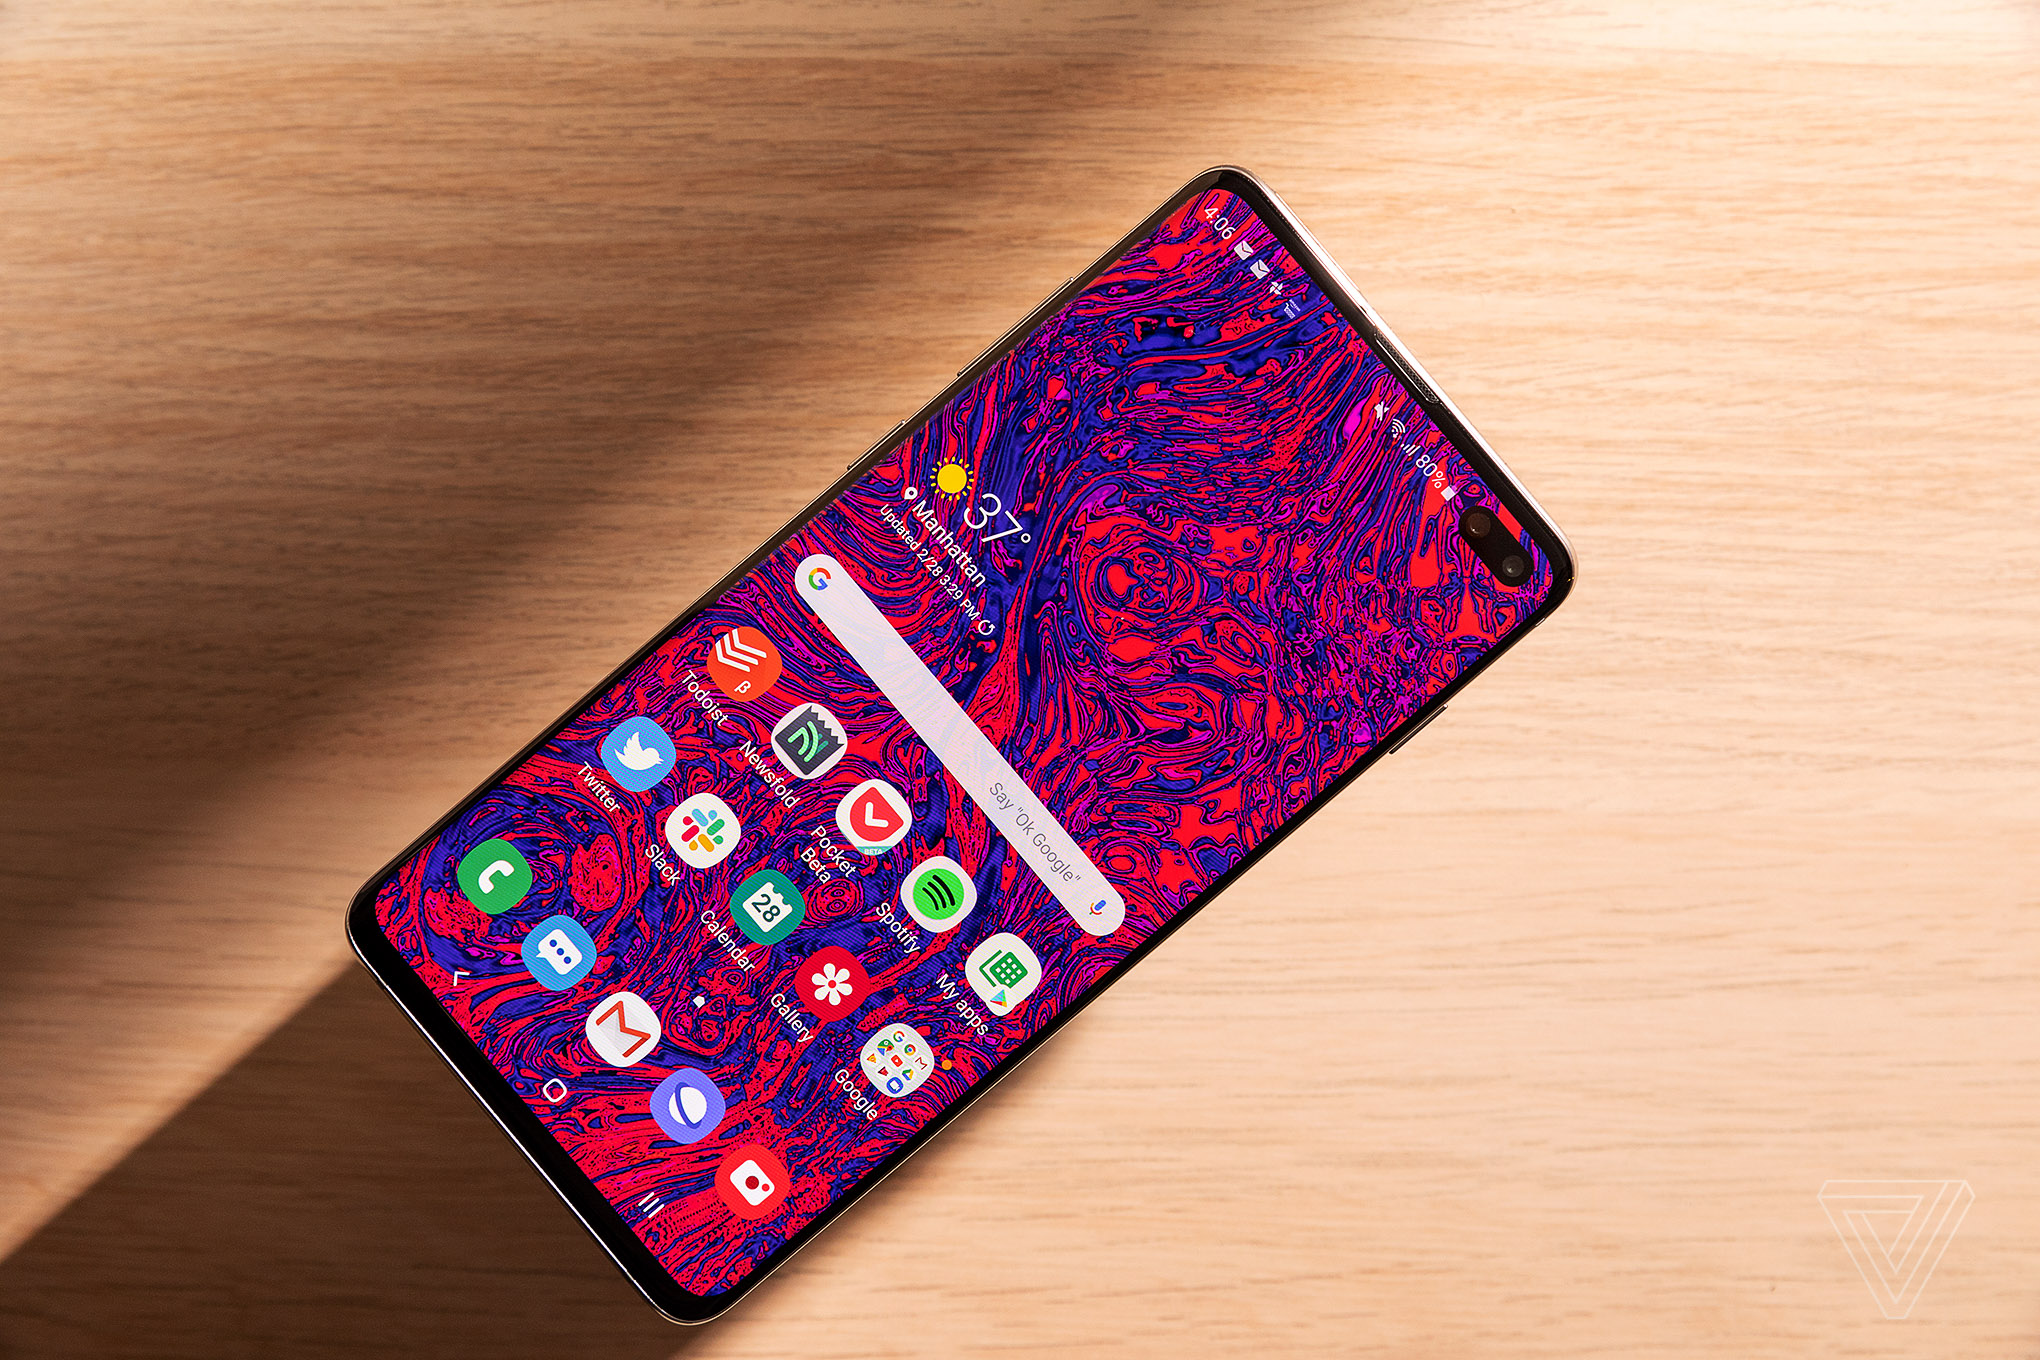 Galaxy S10 Plus How To Disable Face Unlock Technology Android Flagship